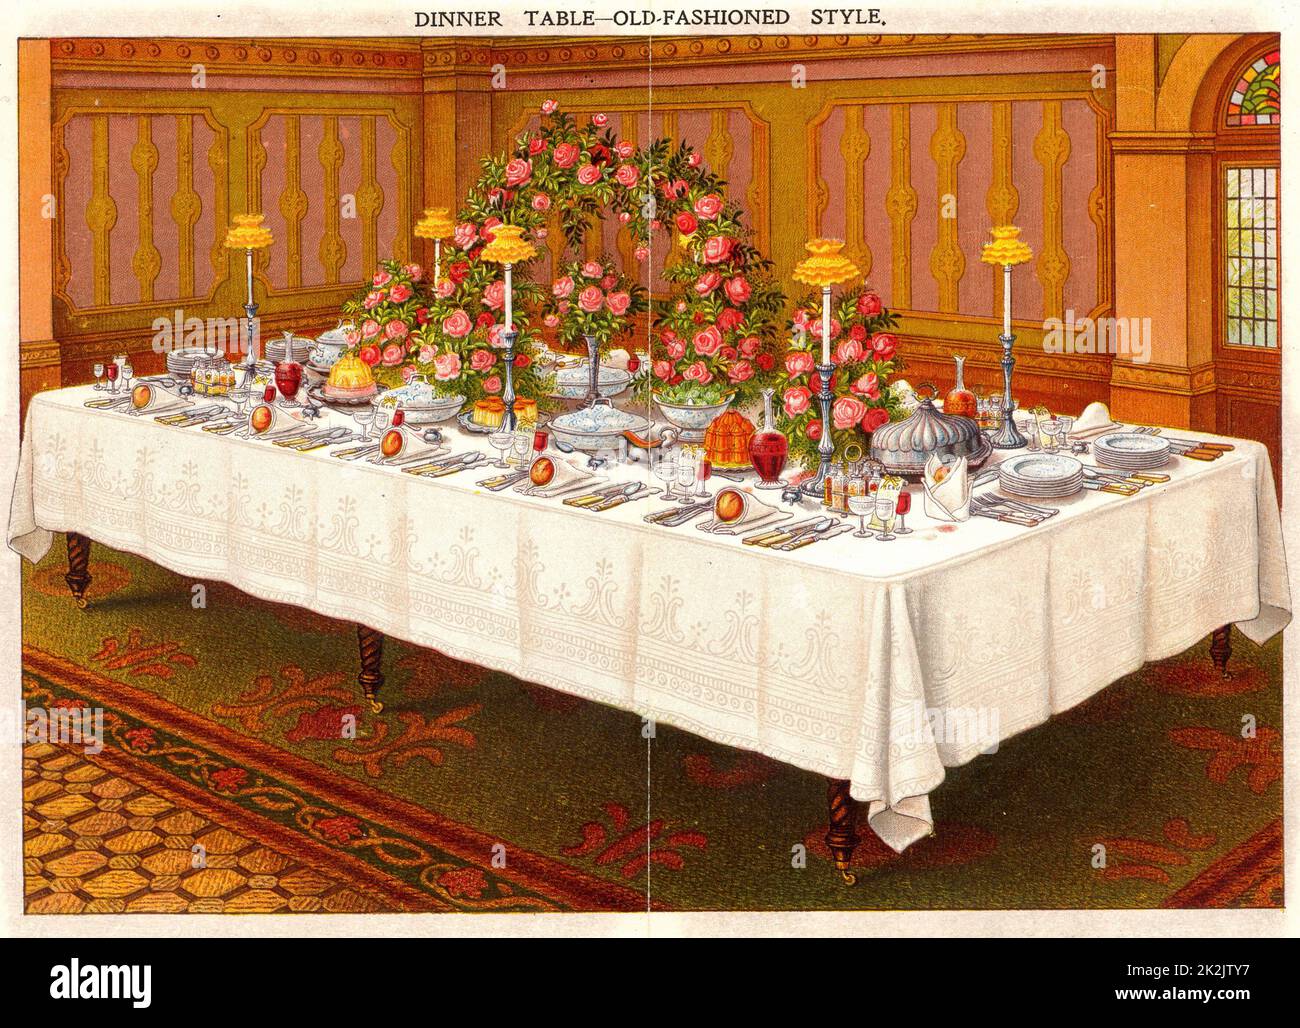 Table covered with a linen cloth and set for a formal dinner party. Shaded candles provide light. Oleograph from 'Household Management' by Isabella Beeton (London, 1906). Stock Photo